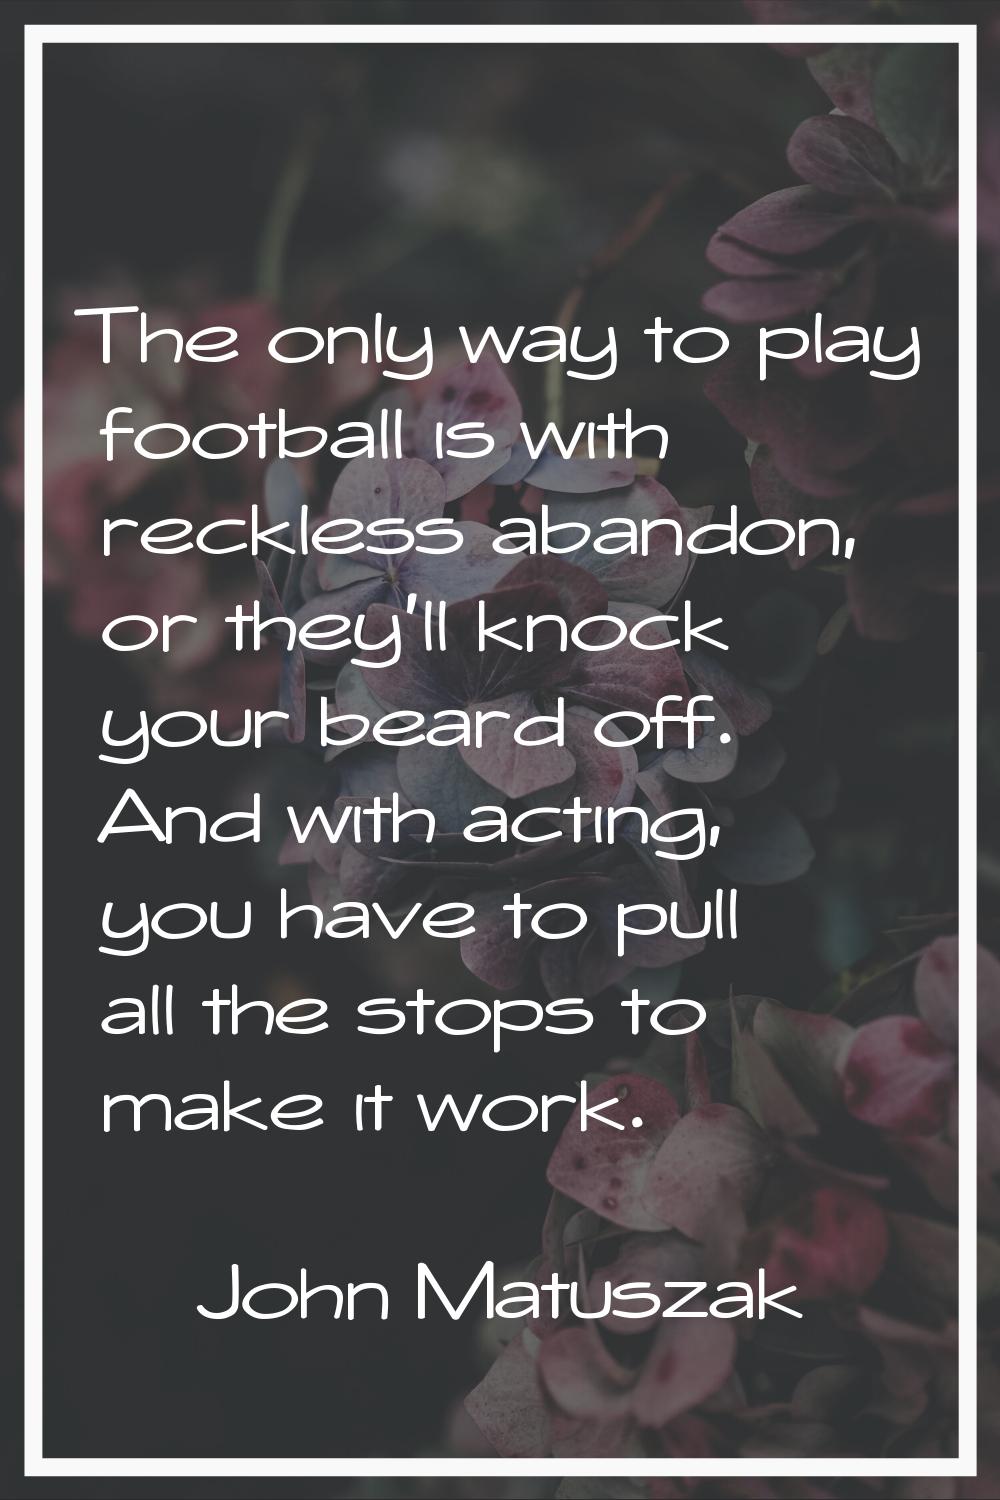 The only way to play football is with reckless abandon, or they'll knock your beard off. And with a